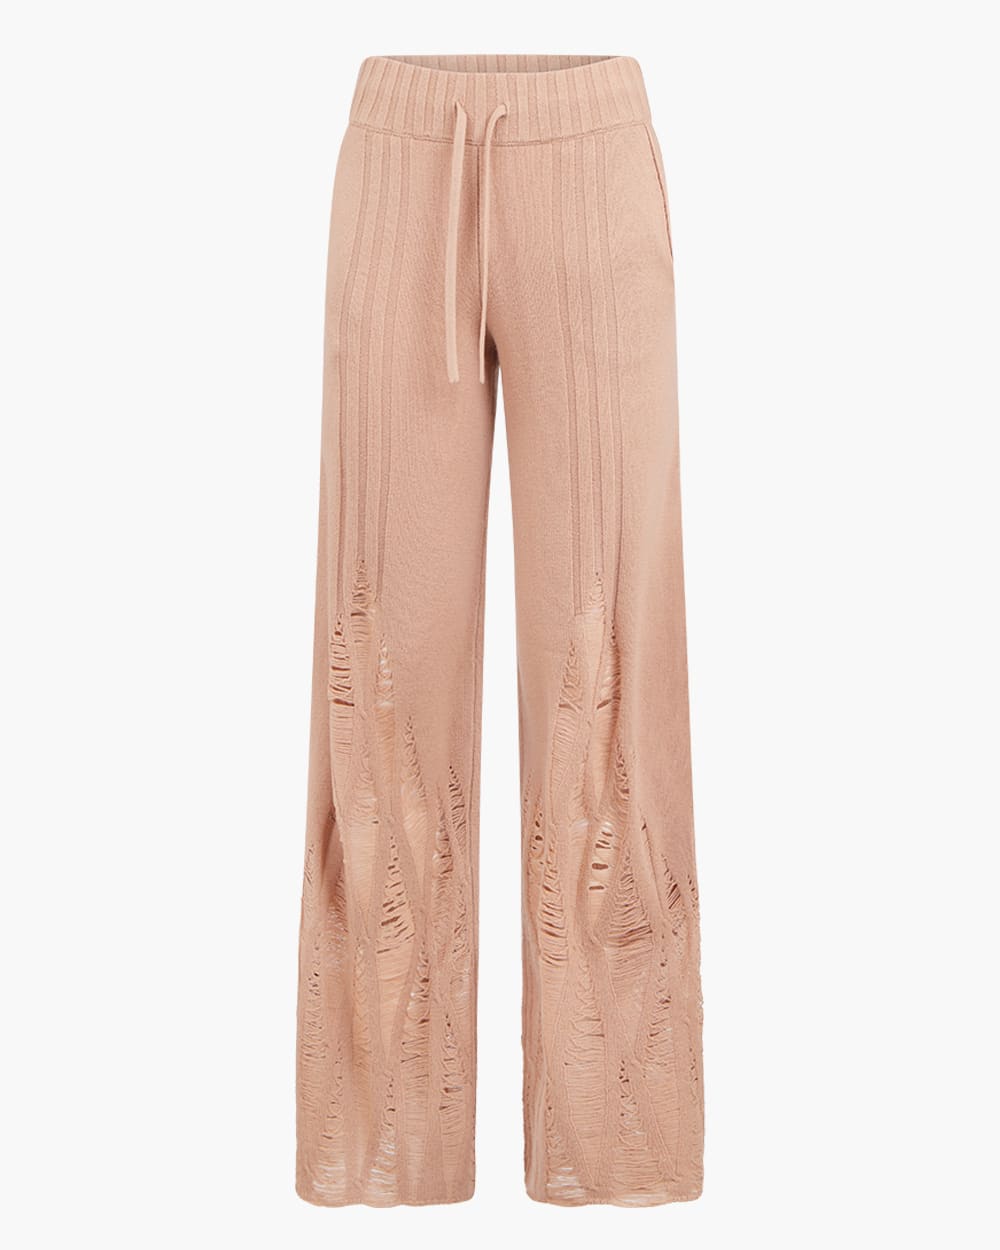 DION LEE WOOL AND CASHMERE DISTRESSED PANTS